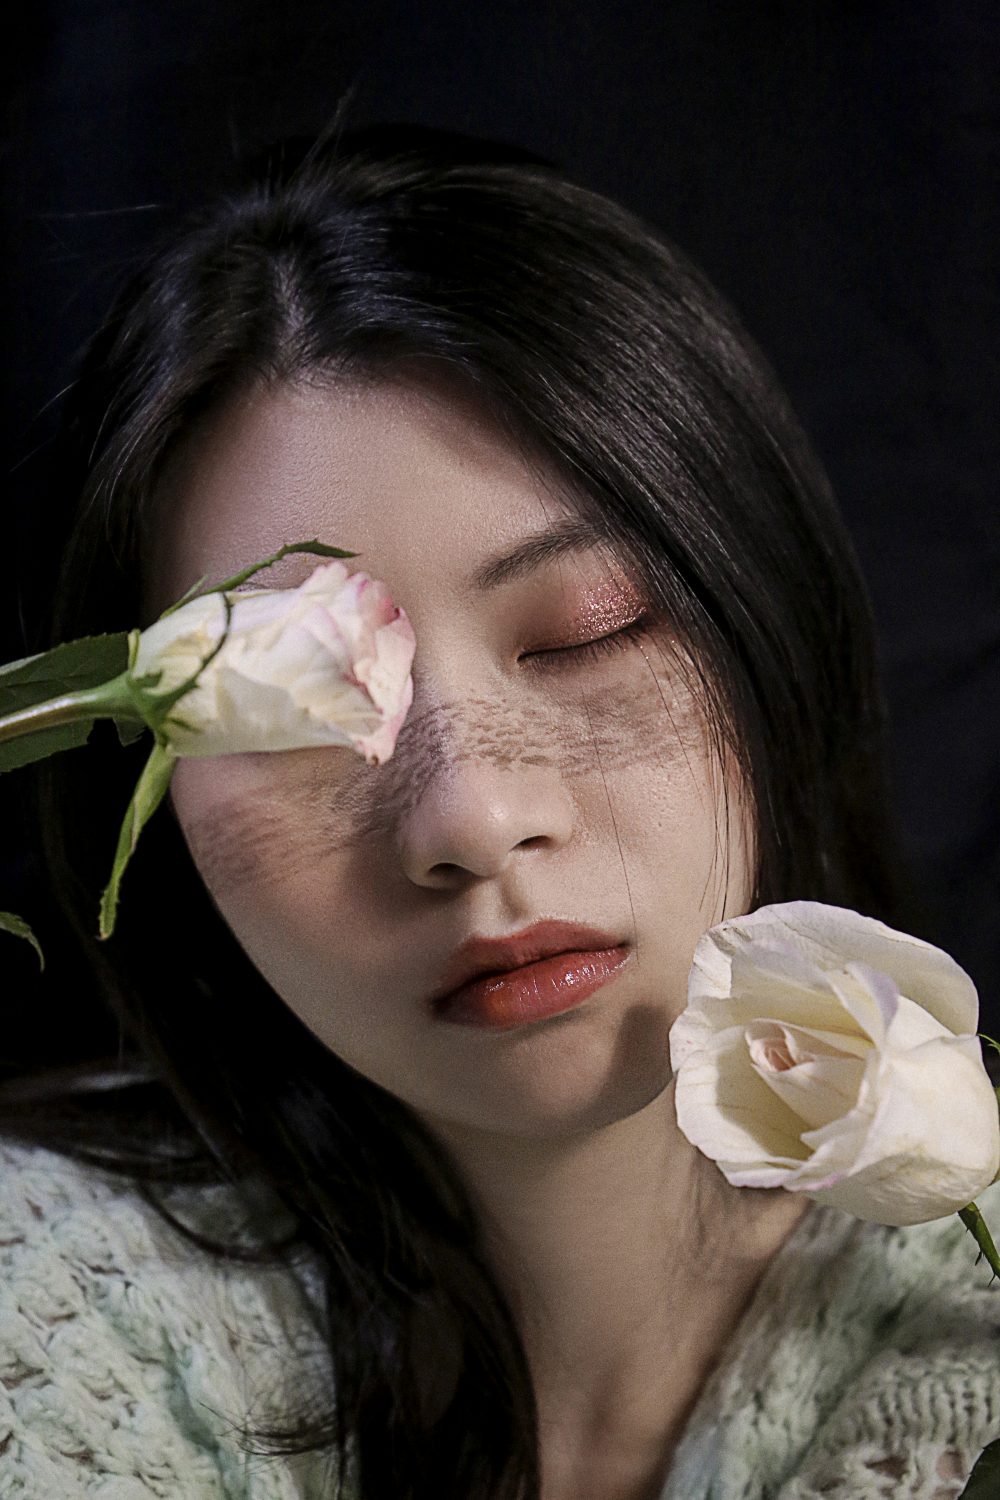 Woman in front of a black background, holding two white and pink roses with one held in front of her right eye.